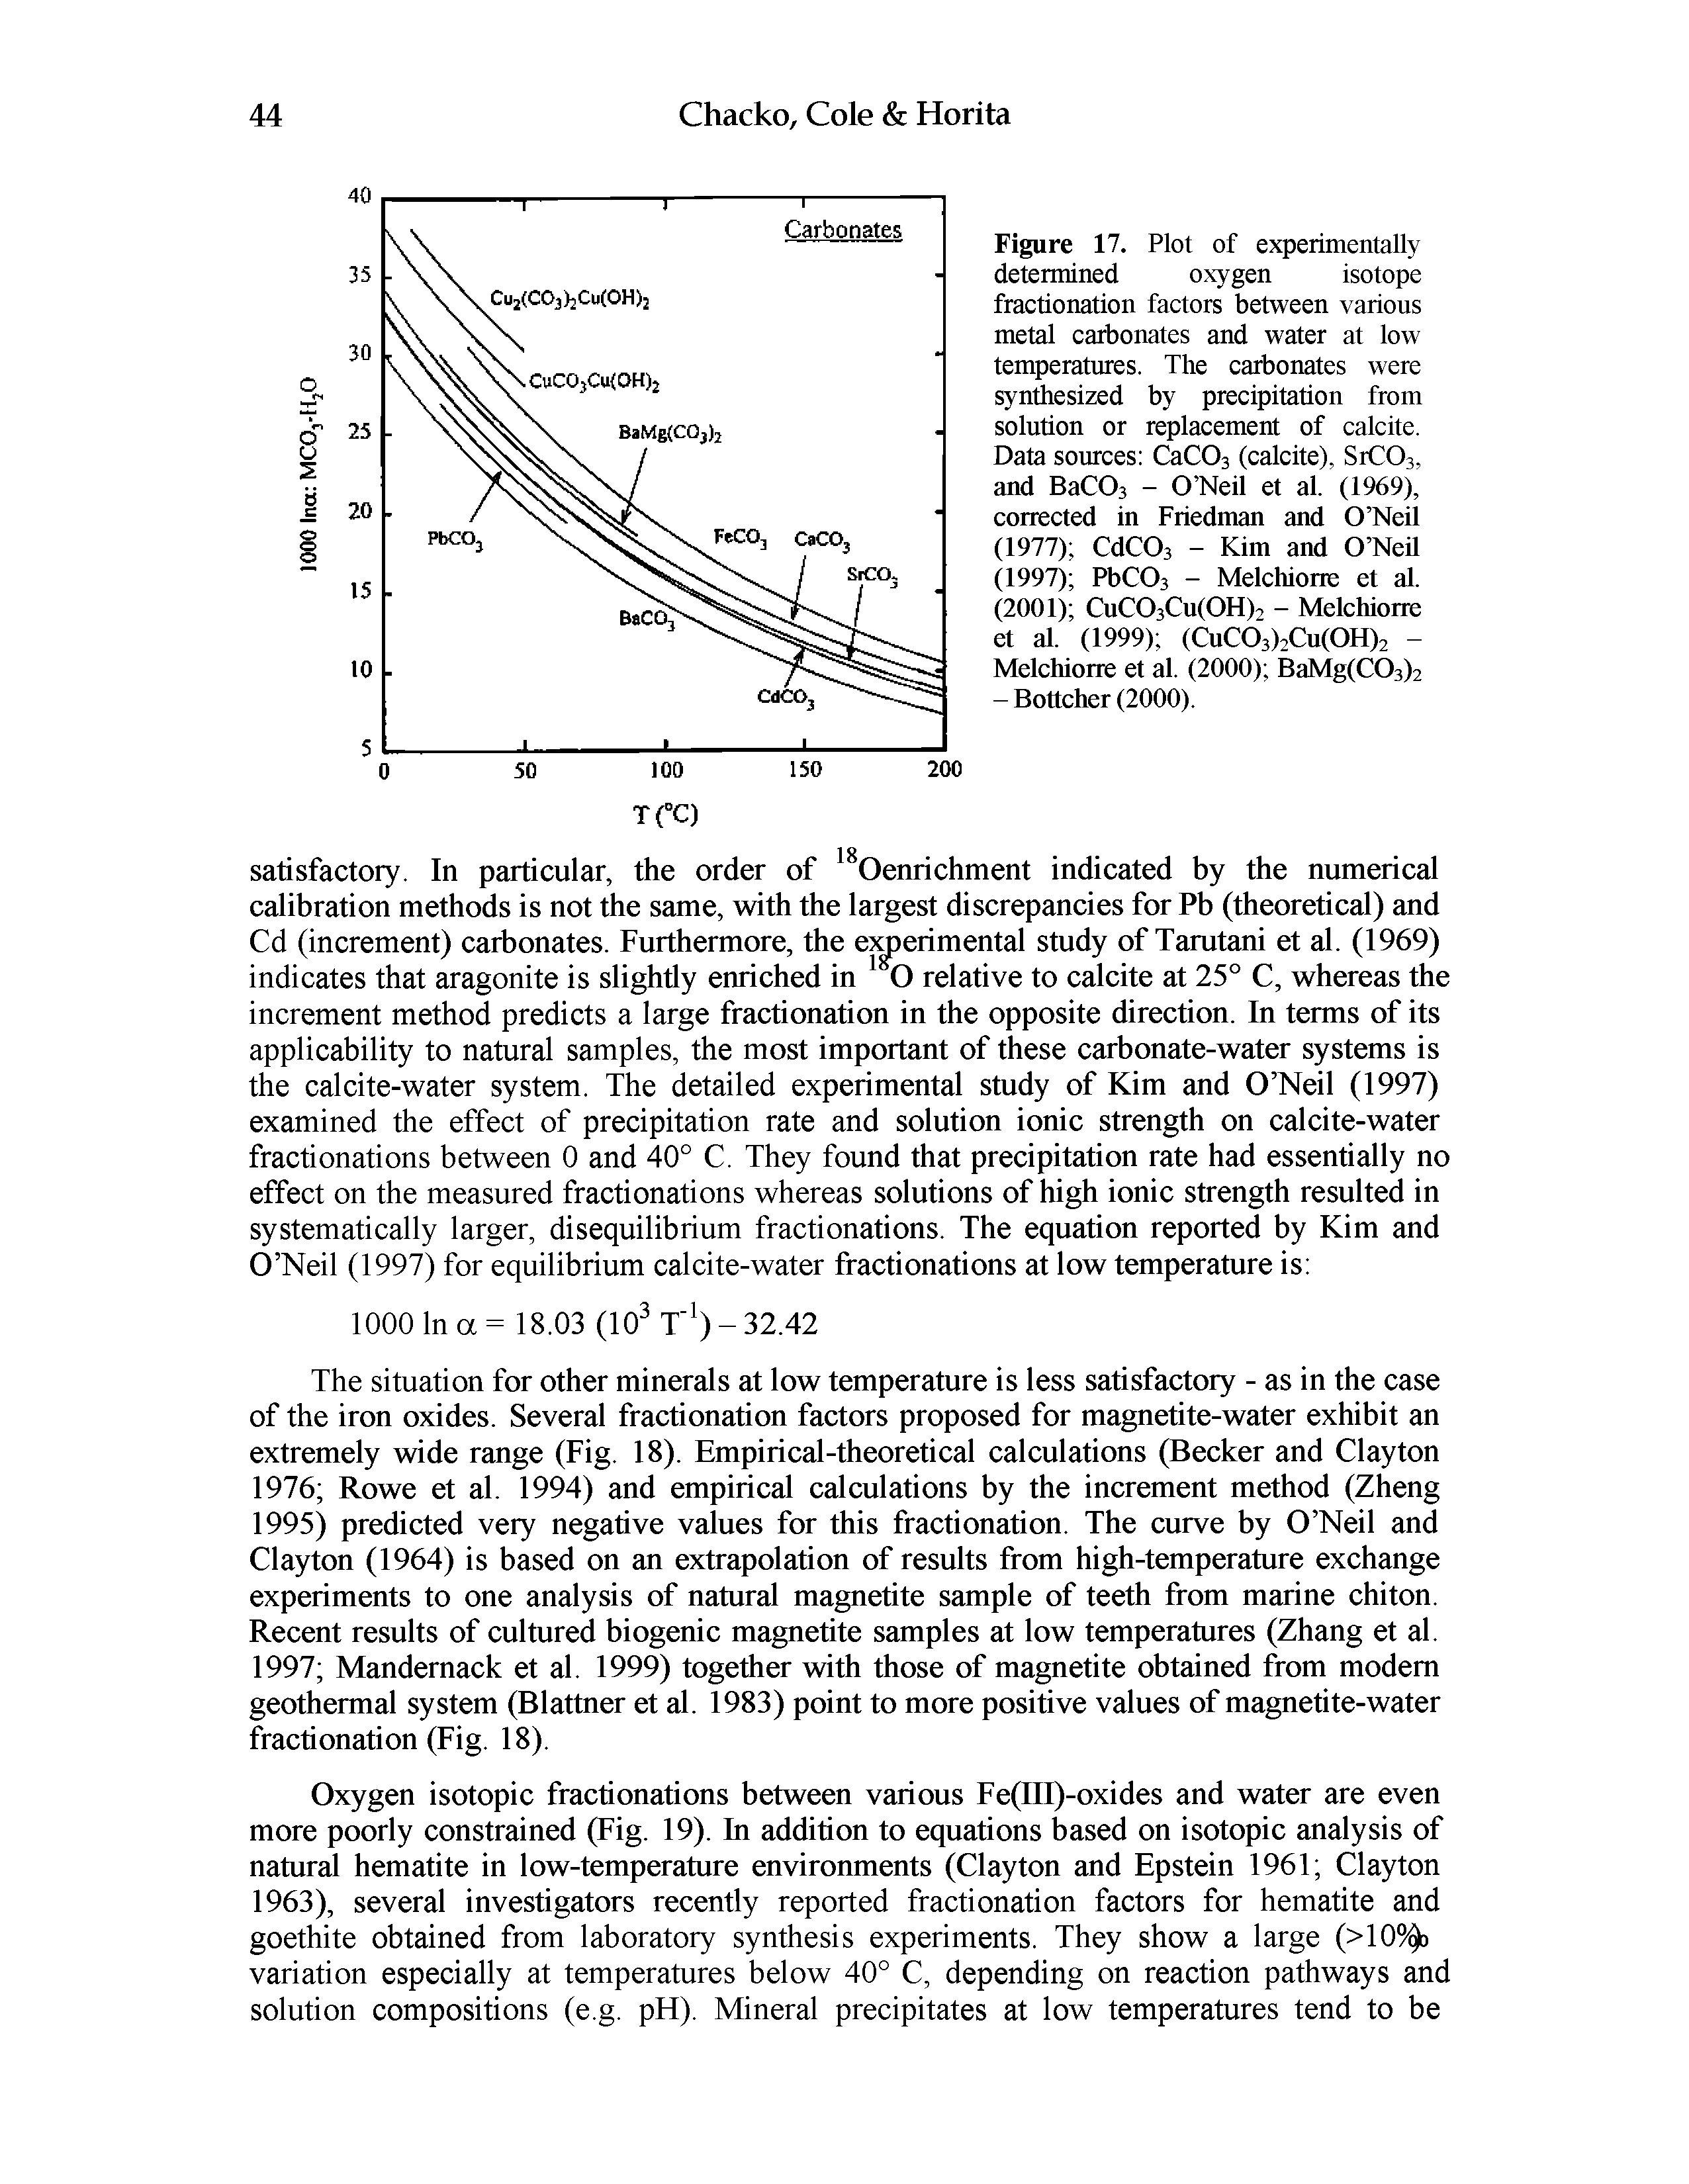 Figure 17. Plot of experimentally determined oxygen isotope fractionation factors between various metal carbonates and water at low temperatures. The carbonates were synAesized by precipitation from solution or replacement of calcite. Data sources CaCOs (calcite), SrCOs, and BaCOs - O Neil et al. (1969), corrected in Friedman and O Neil...